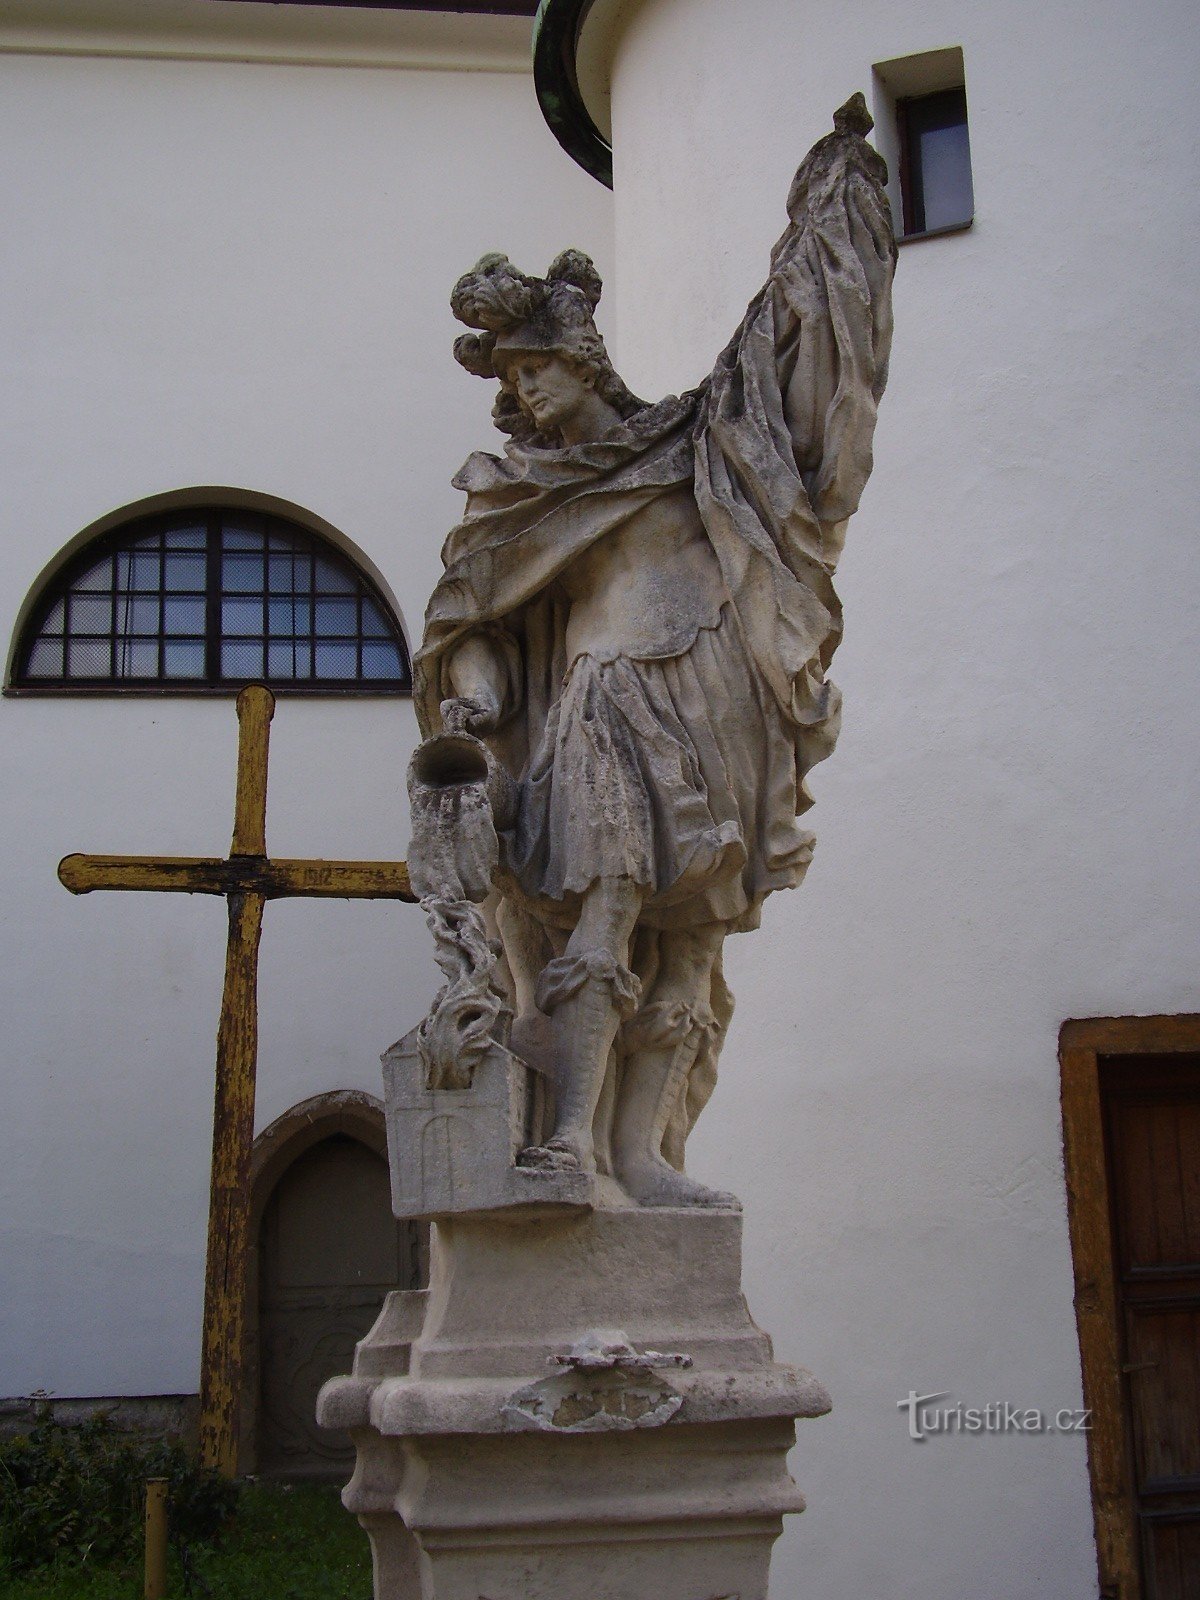 Statue of St. Florian in Rosice near Brno